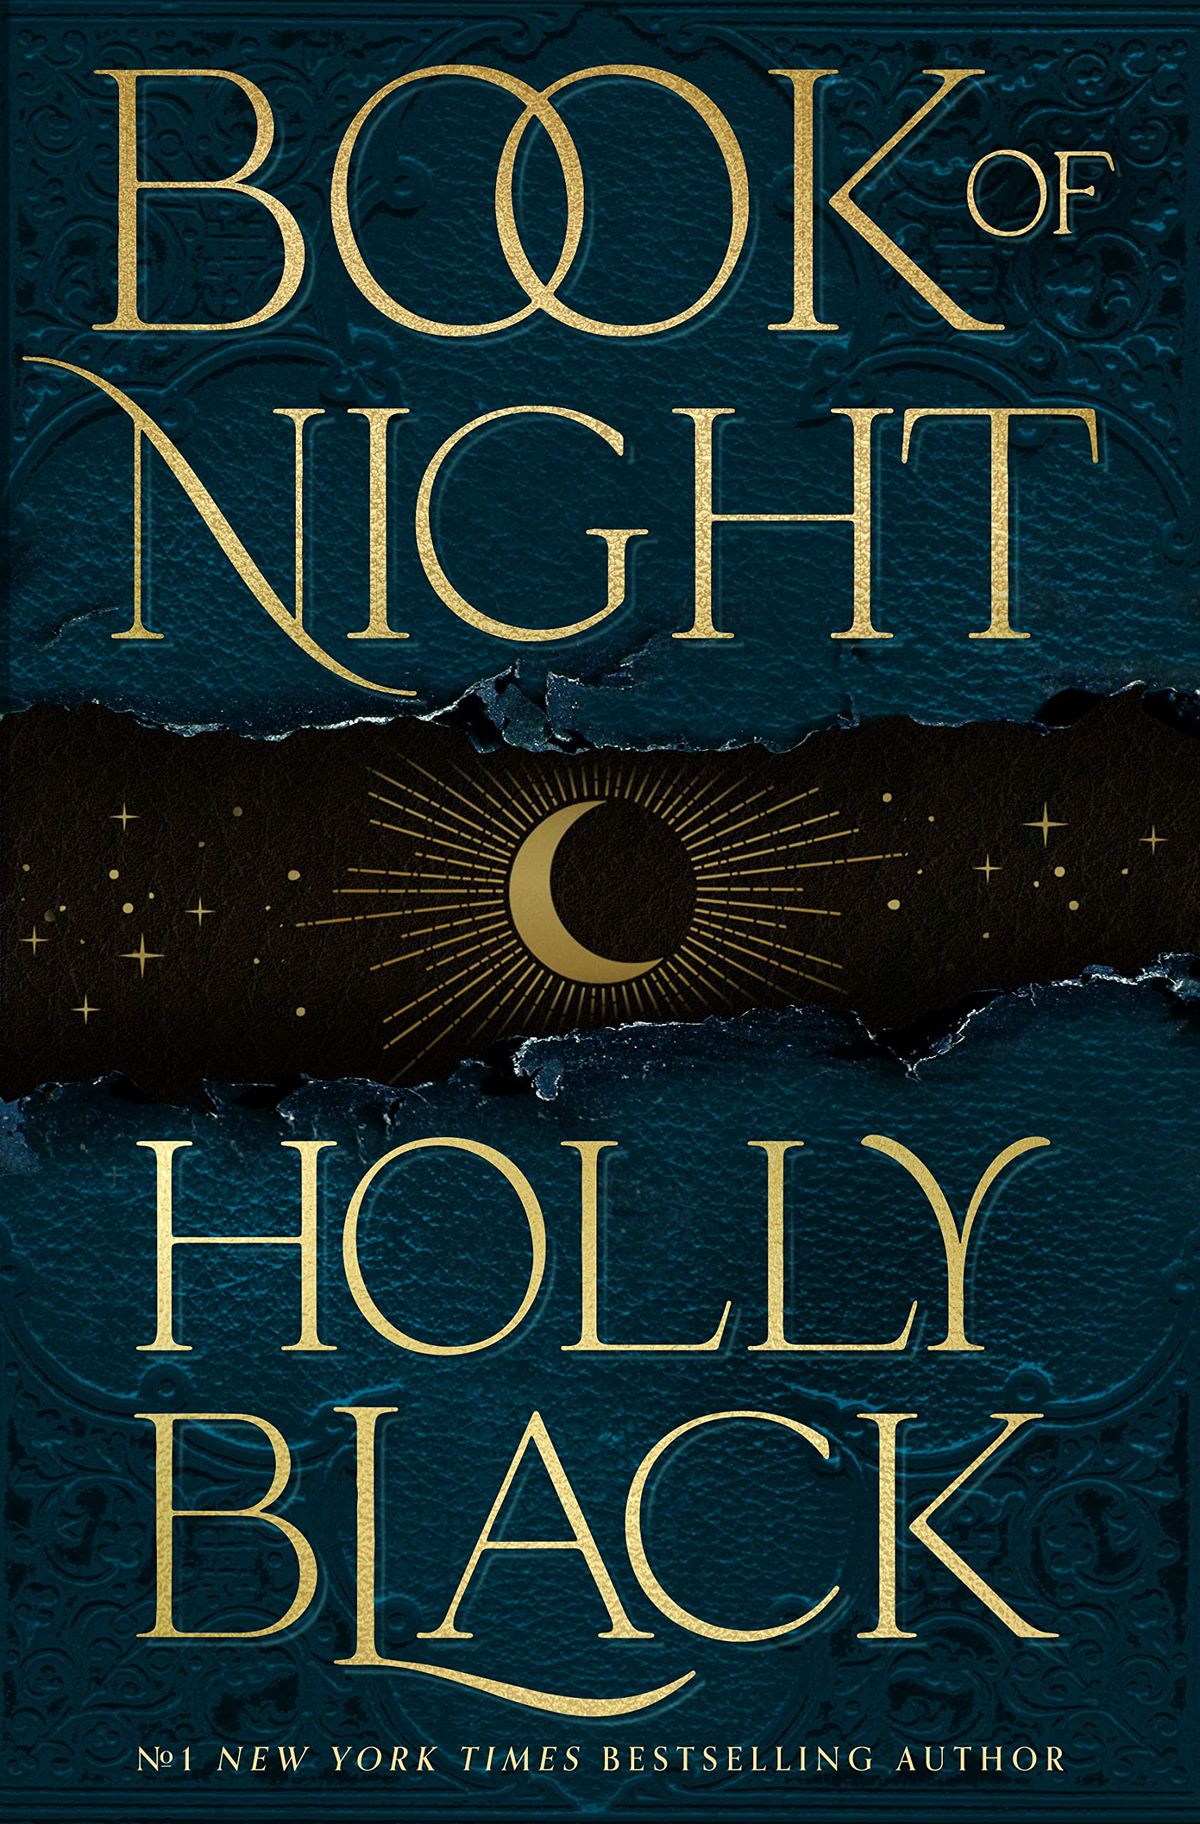 The cover for Book of Night showing the title over a dark blue backdrop with a gold sunburst illustration in the middle